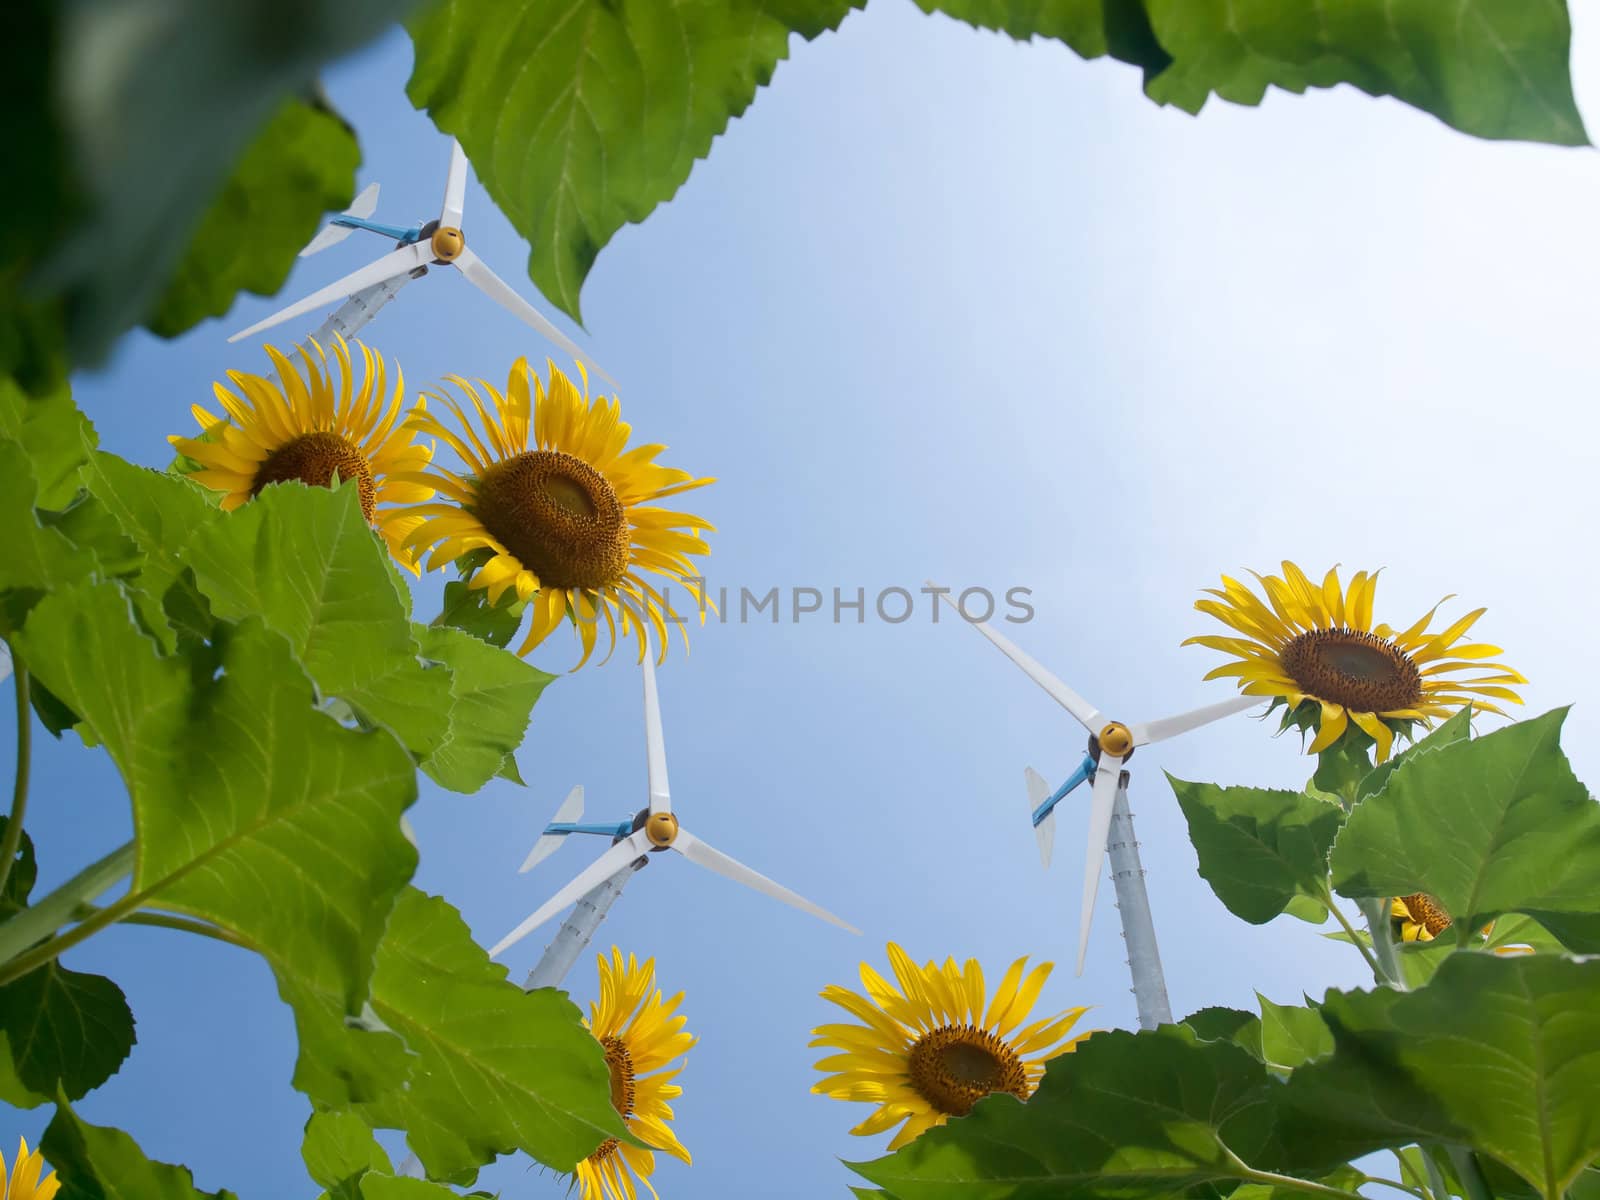 Windmill with sunflowers and pure fresh air
